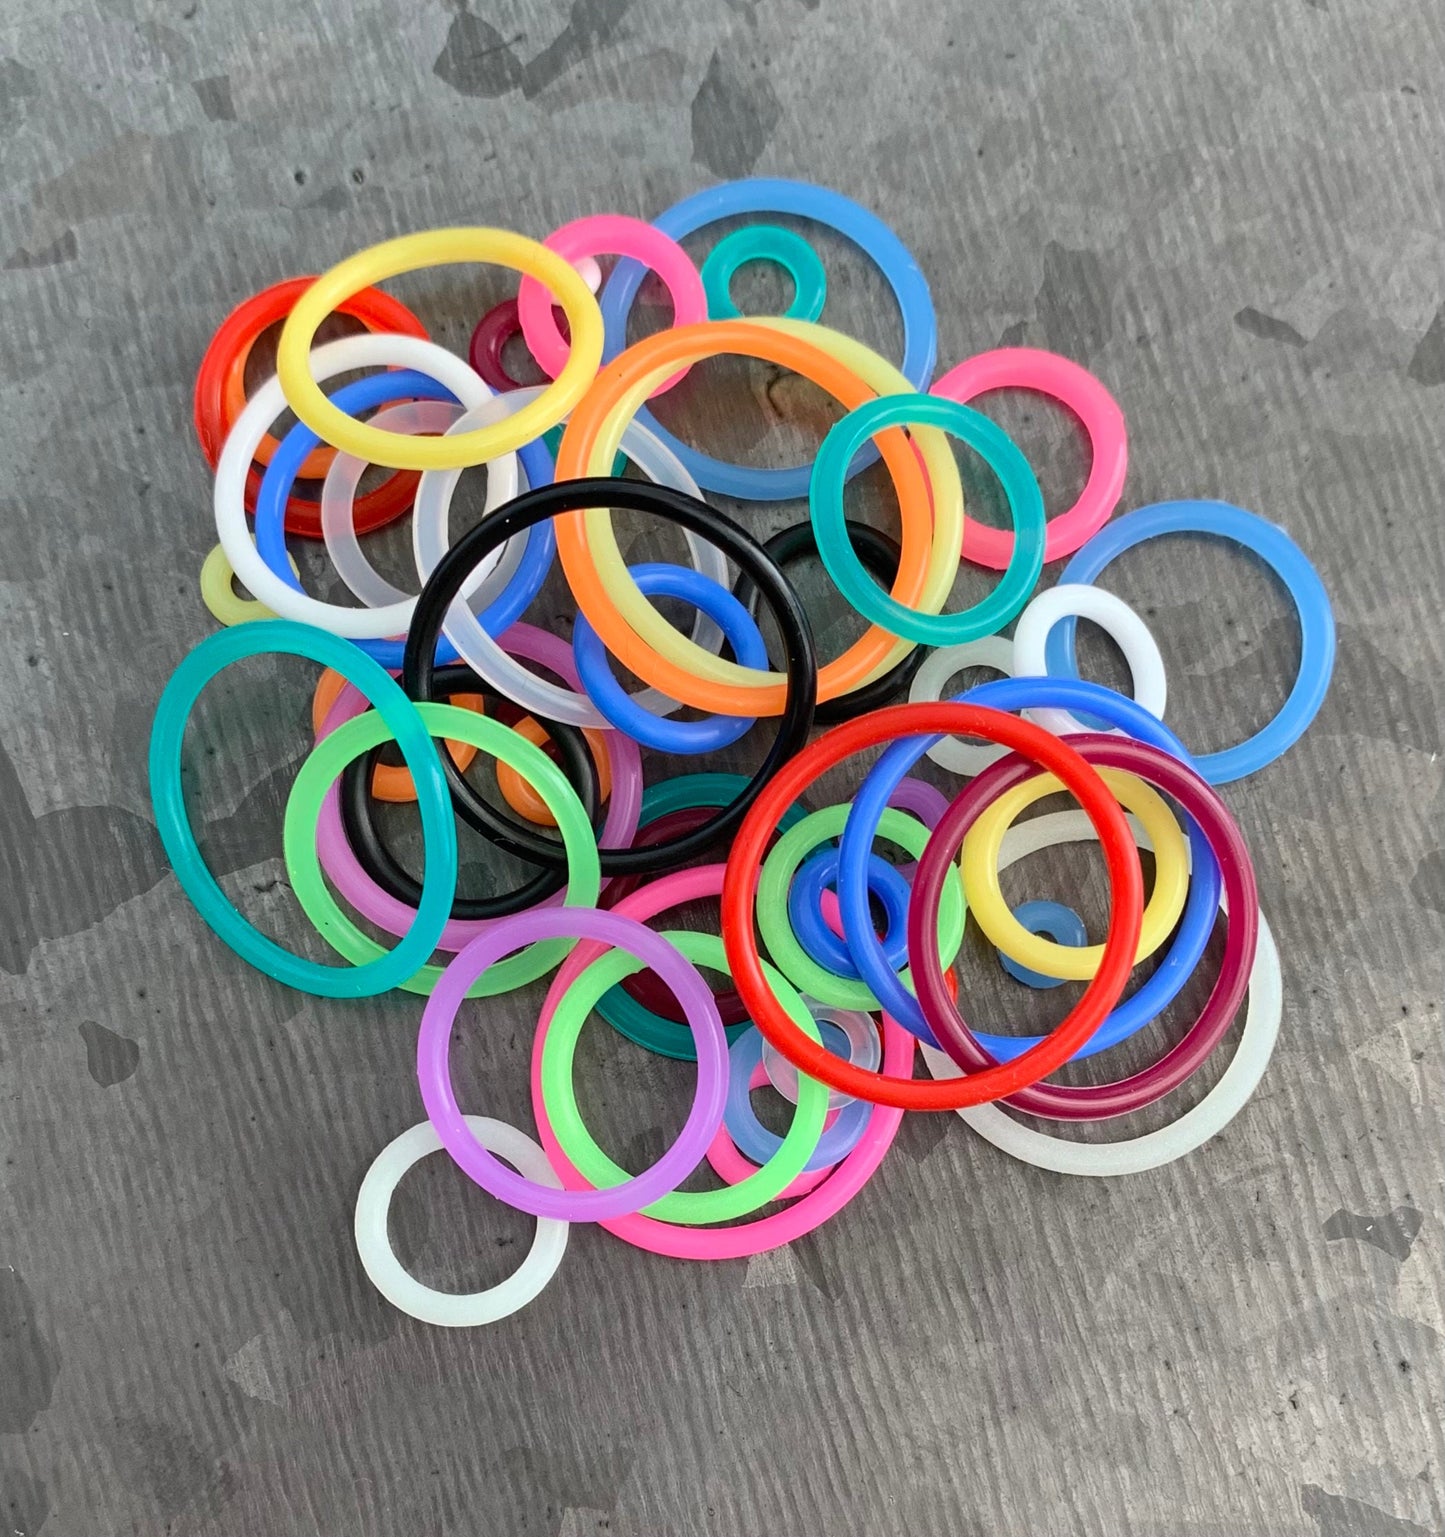 10 pack of Black Replacement O-Rings Bands for Plugs or Tunnels - 13 more colors available!